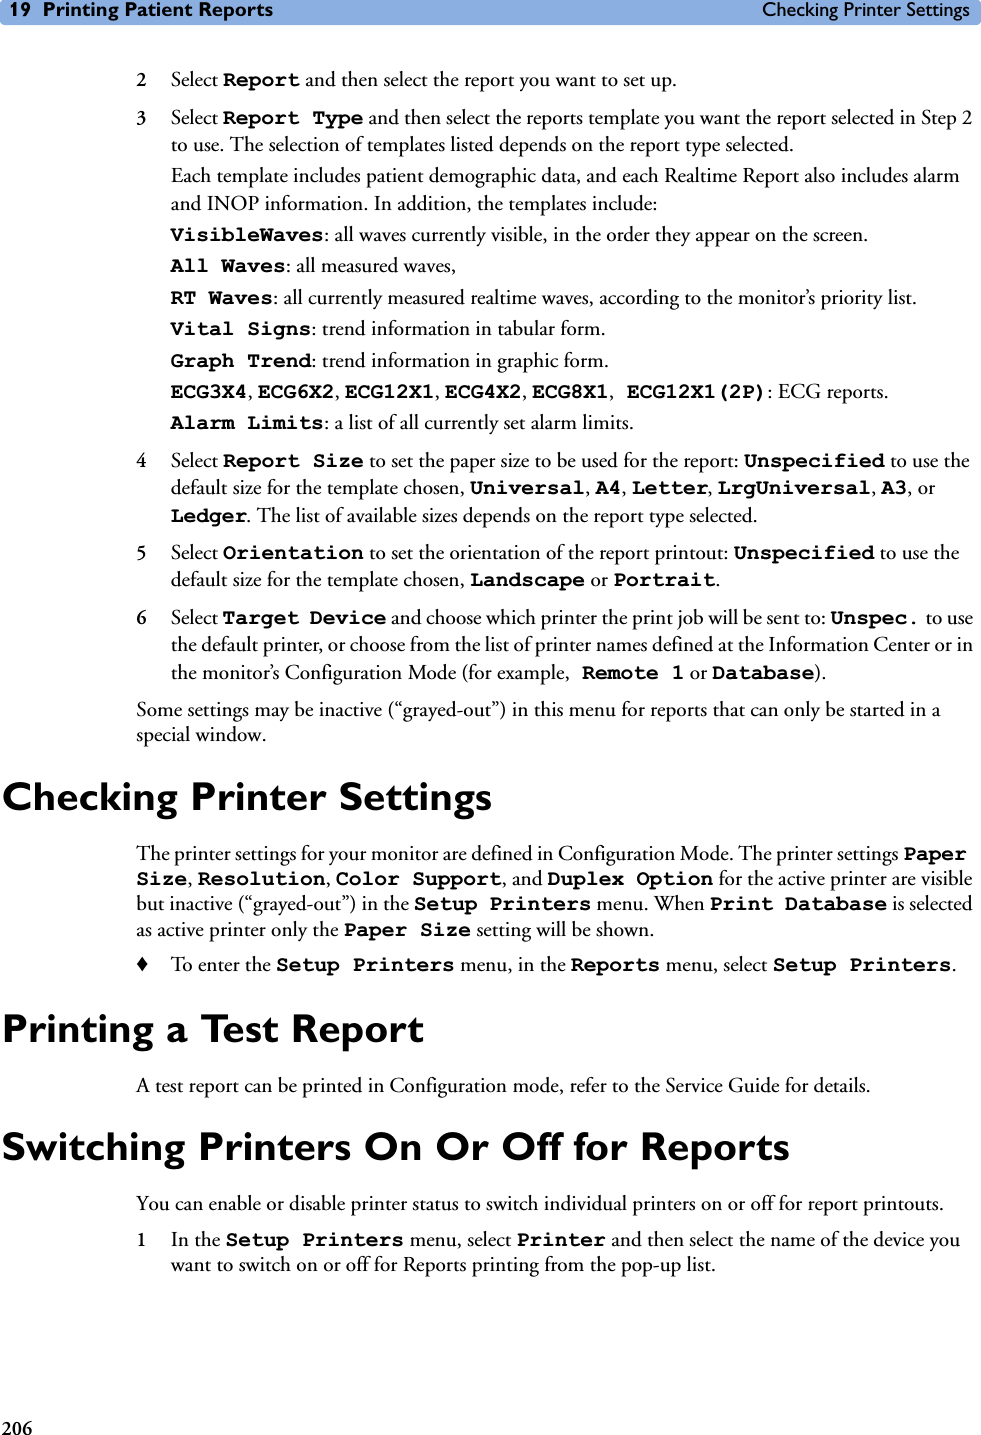 19 Printing Patient Reports Checking Printer Settings2062Select Report and then select the report you want to set up. 3Select Report Type and then select the reports template you want the report selected in Step 2 to use. The selection of templates listed depends on the report type selected. Each template includes patient demographic data, and each Realtime Report also includes alarm and INOP information. In addition, the templates include:VisibleWaves: all waves currently visible, in the order they appear on the screen.All Waves: all measured waves,RT Waves: all currently measured realtime waves, according to the monitor’s priority list.Vital Signs: trend information in tabular form.Graph Trend: trend information in graphic form.ECG3X4, ECG6X2, ECG12X1, ECG4X2, ECG8X1, ECG12X1(2P): ECG reports.Alarm Limits: a list of all currently set alarm limits.4Select Report Size to set the paper size to be used for the report: Unspecified to use the default size for the template chosen, Universal, A4, Letter, LrgUniversal, A3, or Ledger. The list of available sizes depends on the report type selected.5Select Orientation to set the orientation of the report printout: Unspecified to use the default size for the template chosen, Landscape or Portrait.6Select Target Device and choose which printer the print job will be sent to: Unspec. to use the default printer, or choose from the list of printer names defined at the Information Center or in the monitor’s Configuration Mode (for example, Remote 1 or Database). Some settings may be inactive (“grayed-out”) in this menu for reports that can only be started in a special window.Checking Printer Settings The printer settings for your monitor are defined in Configuration Mode. The printer settings Paper Size, Resolution, Color Support, and Duplex Option for the active printer are visible but inactive (“grayed-out”) in the Setup Printers menu. When Print Database is selected as active printer only the Paper Size setting will be shown. ♦To enter the Setup Printers menu, in the Reports menu, select Setup Printers.Printing a Test ReportA test report can be printed in Configuration mode, refer to the Service Guide for details.Switching Printers On Or Off for ReportsYou can enable or disable printer status to switch individual printers on or off for report printouts. 1In the Setup Printers menu, select Printer and then select the name of the device you want to switch on or off for Reports printing from the pop-up list.